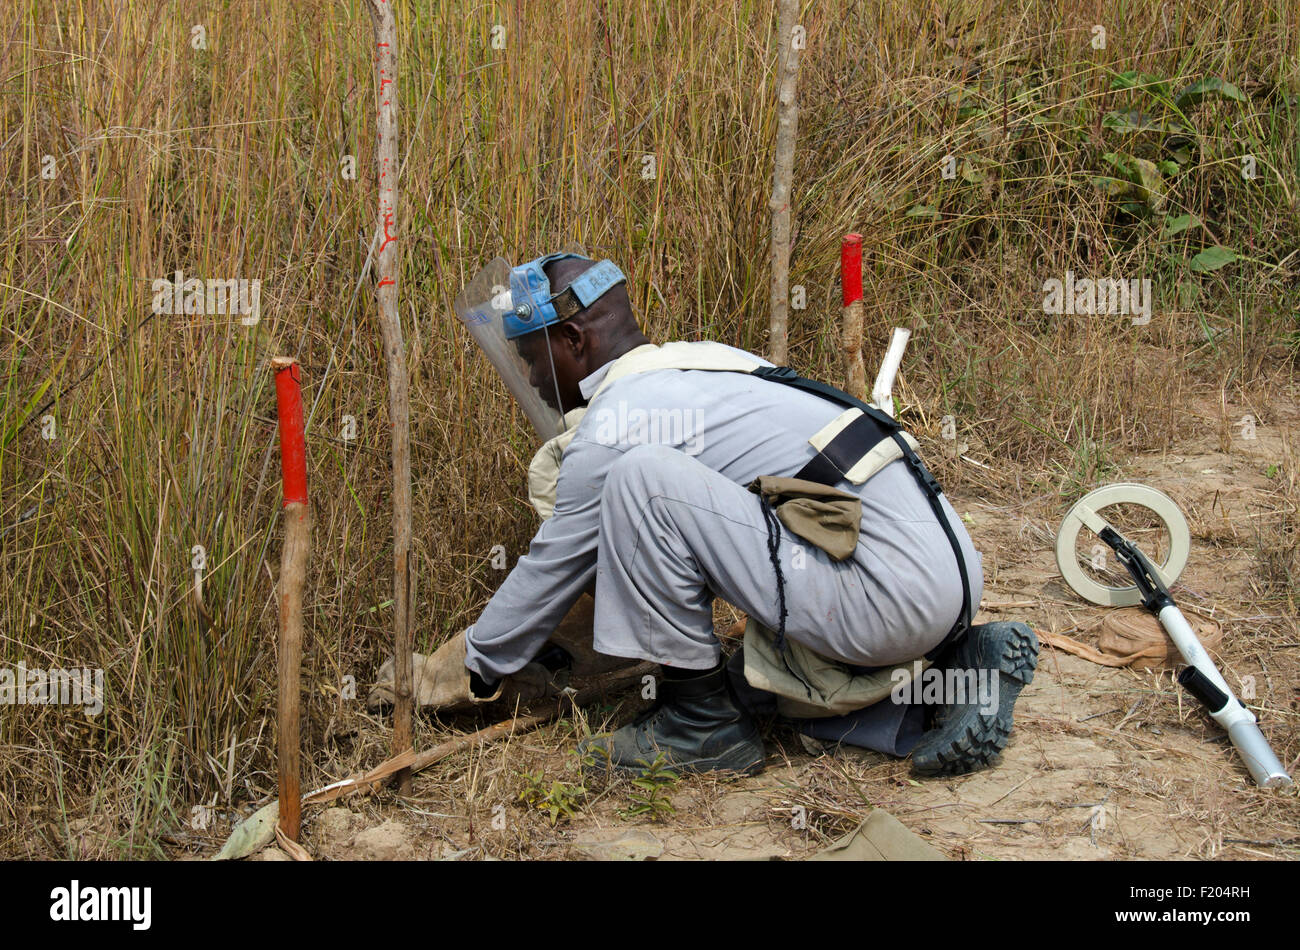 Angola, Mine clearence specialist preparing equipment used to look for unexploded ordenance. Stock Photo